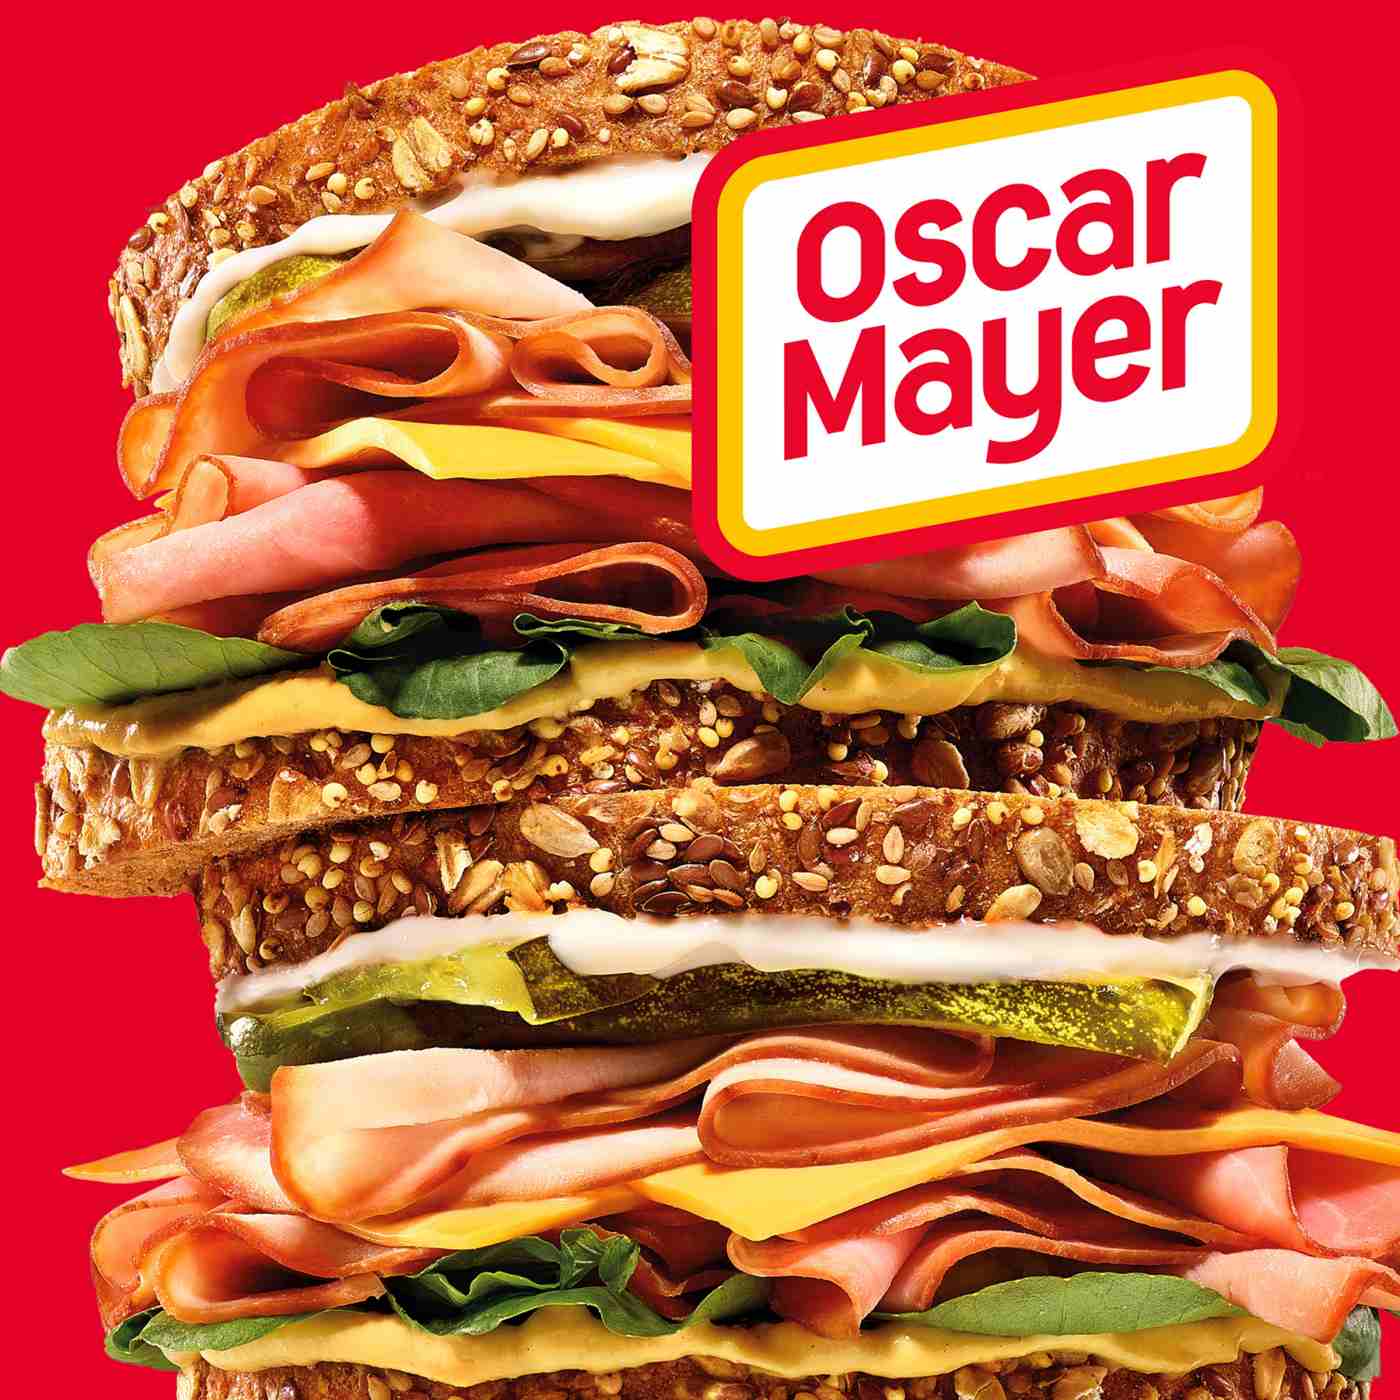 Oscar Mayer Deli Fresh Oven Roasted Turkey Breast & Smoked Uncured Sliced Ham Lunch Meats - Family Pack; image 3 of 6